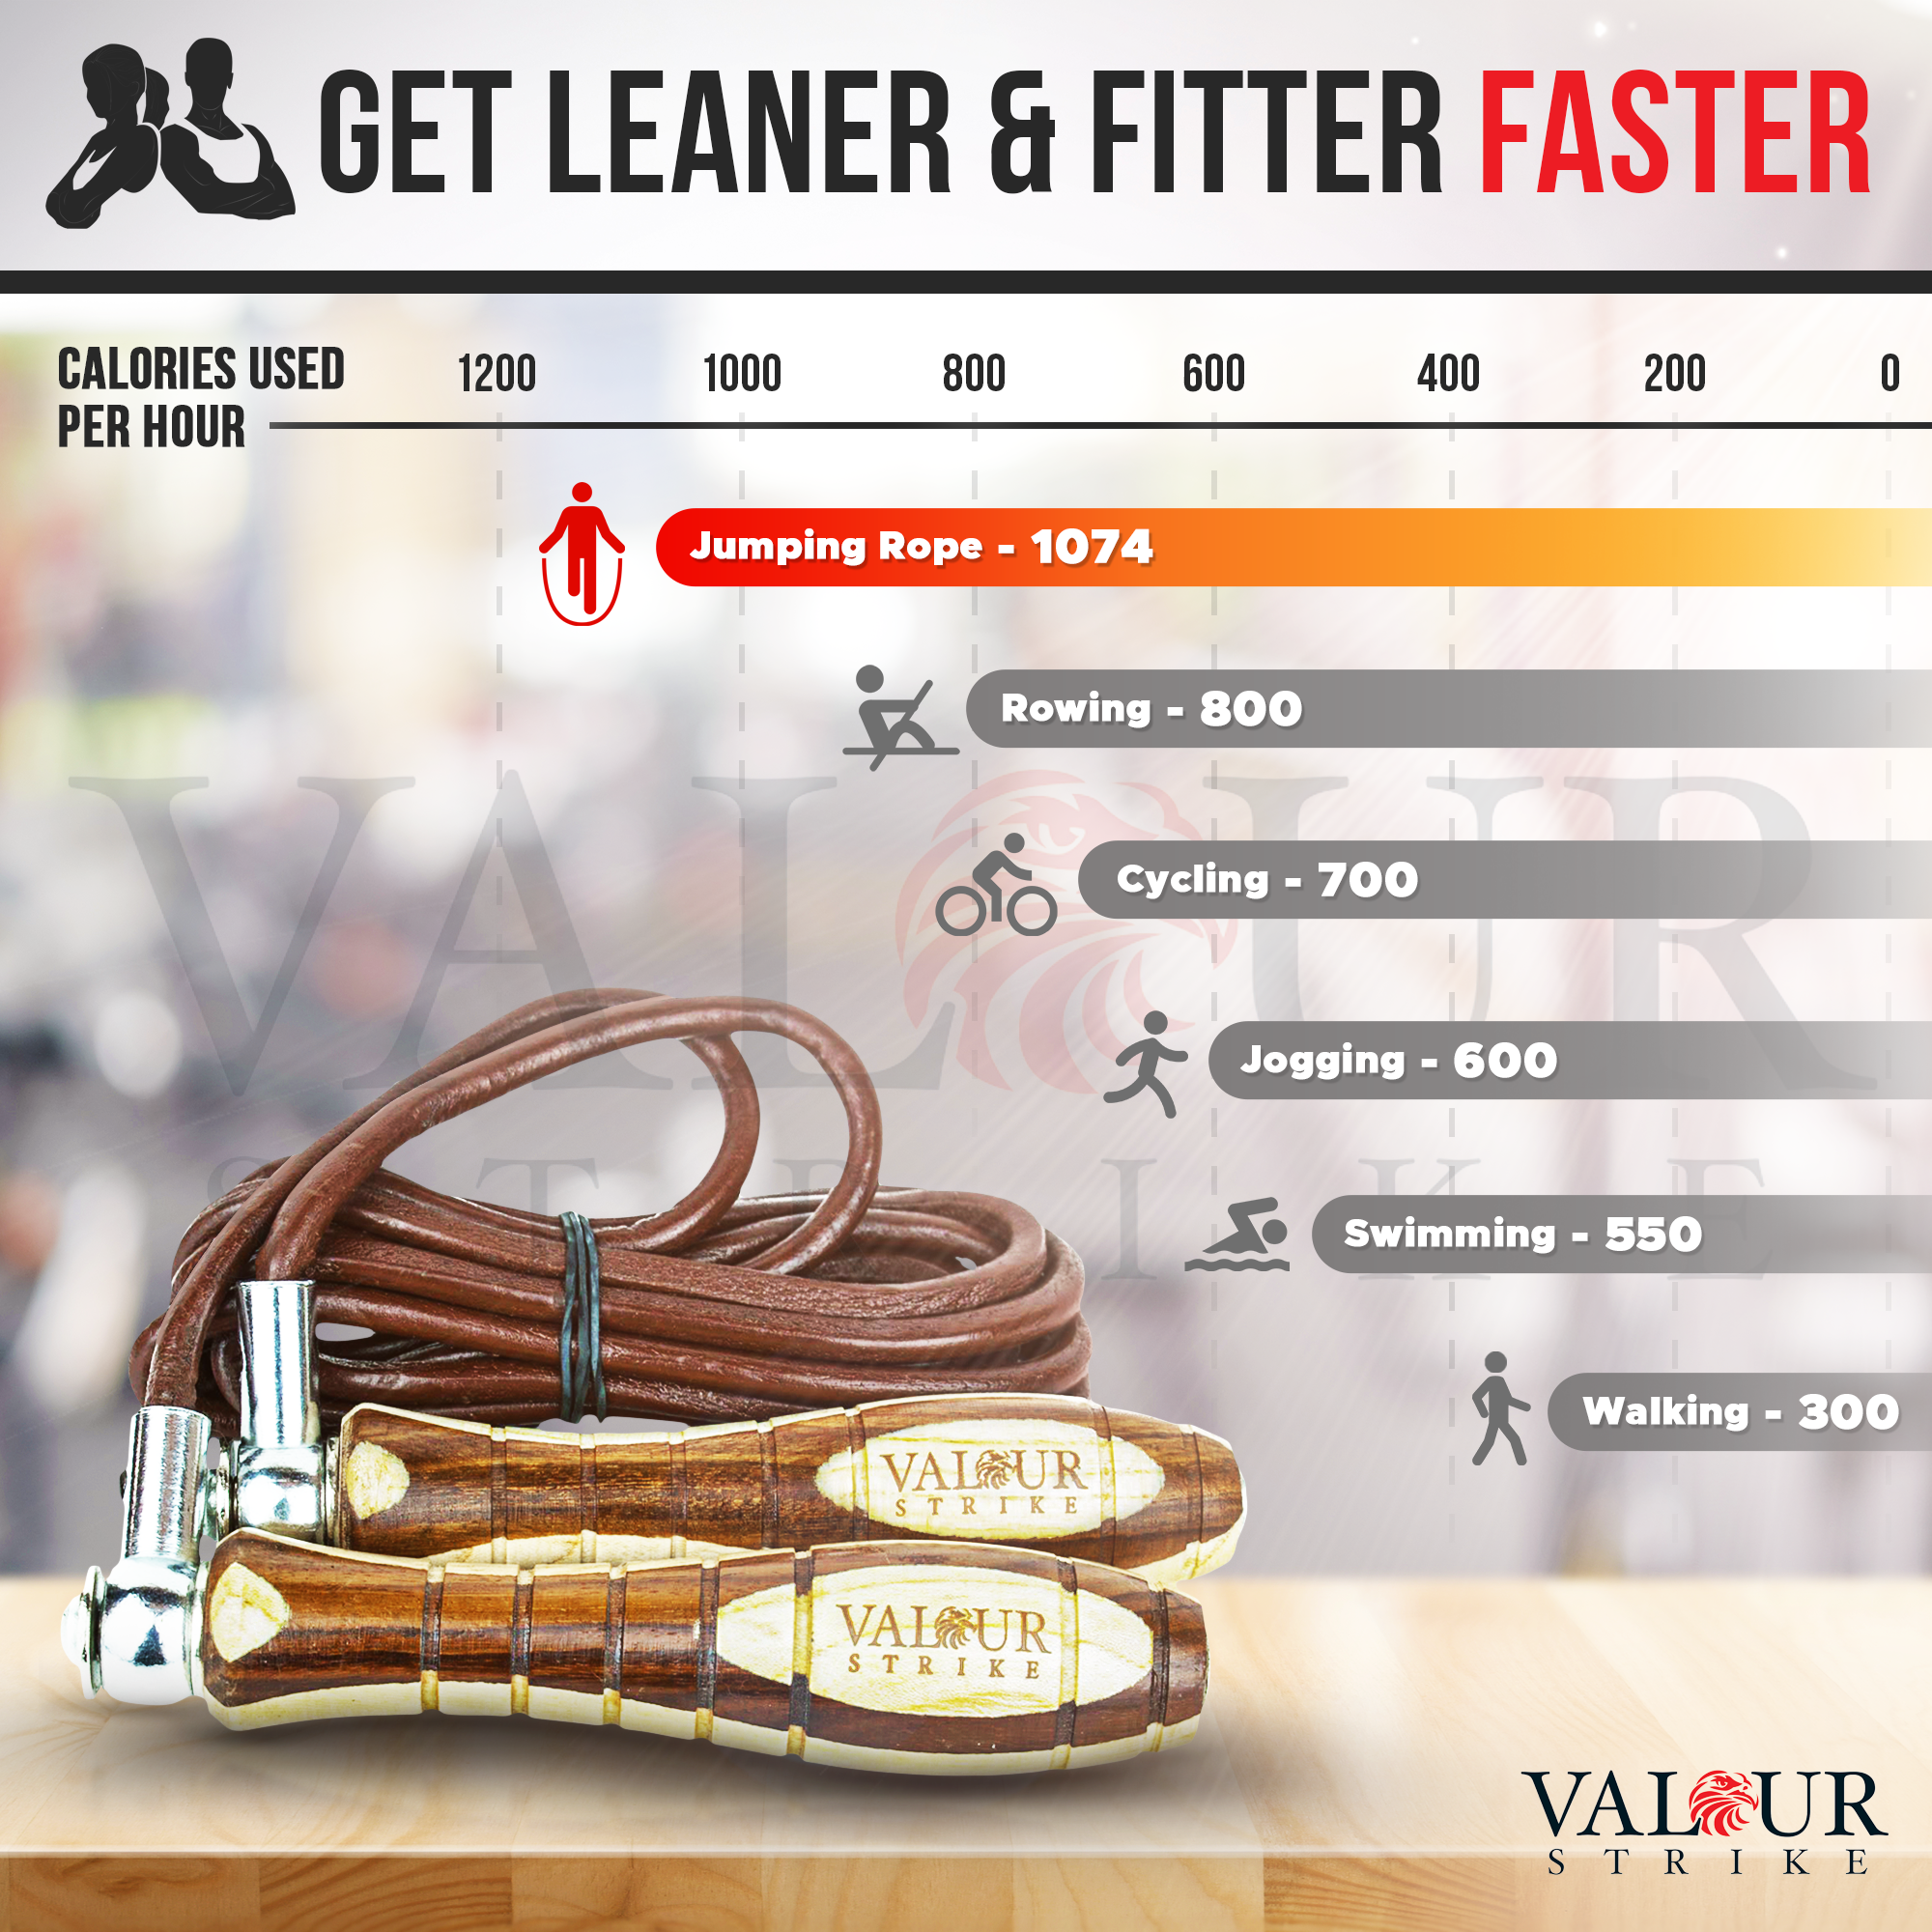 weighted skipping rope calories burnt per hour